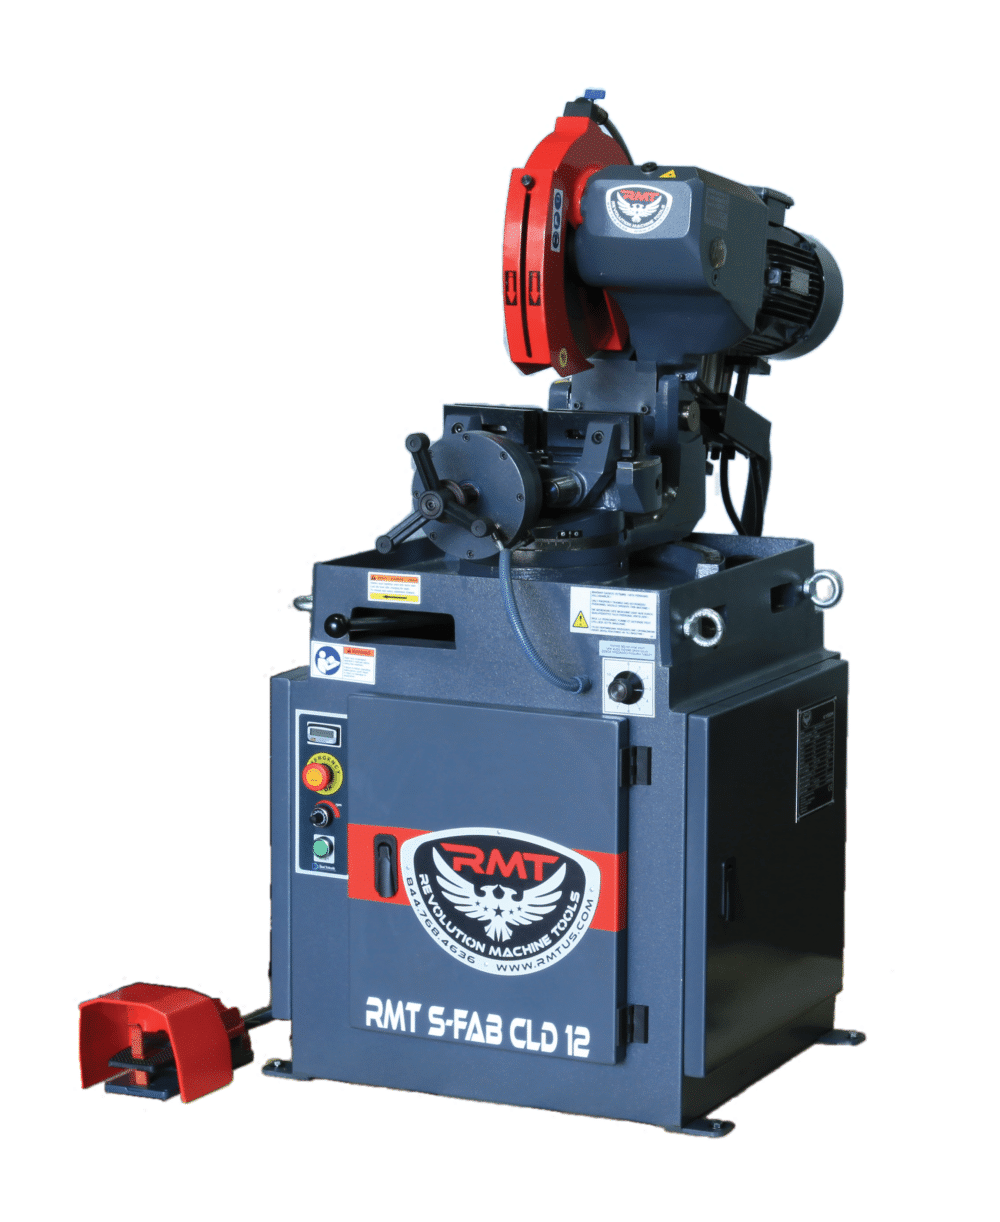 S-FAB CLD 12 Cold Saw